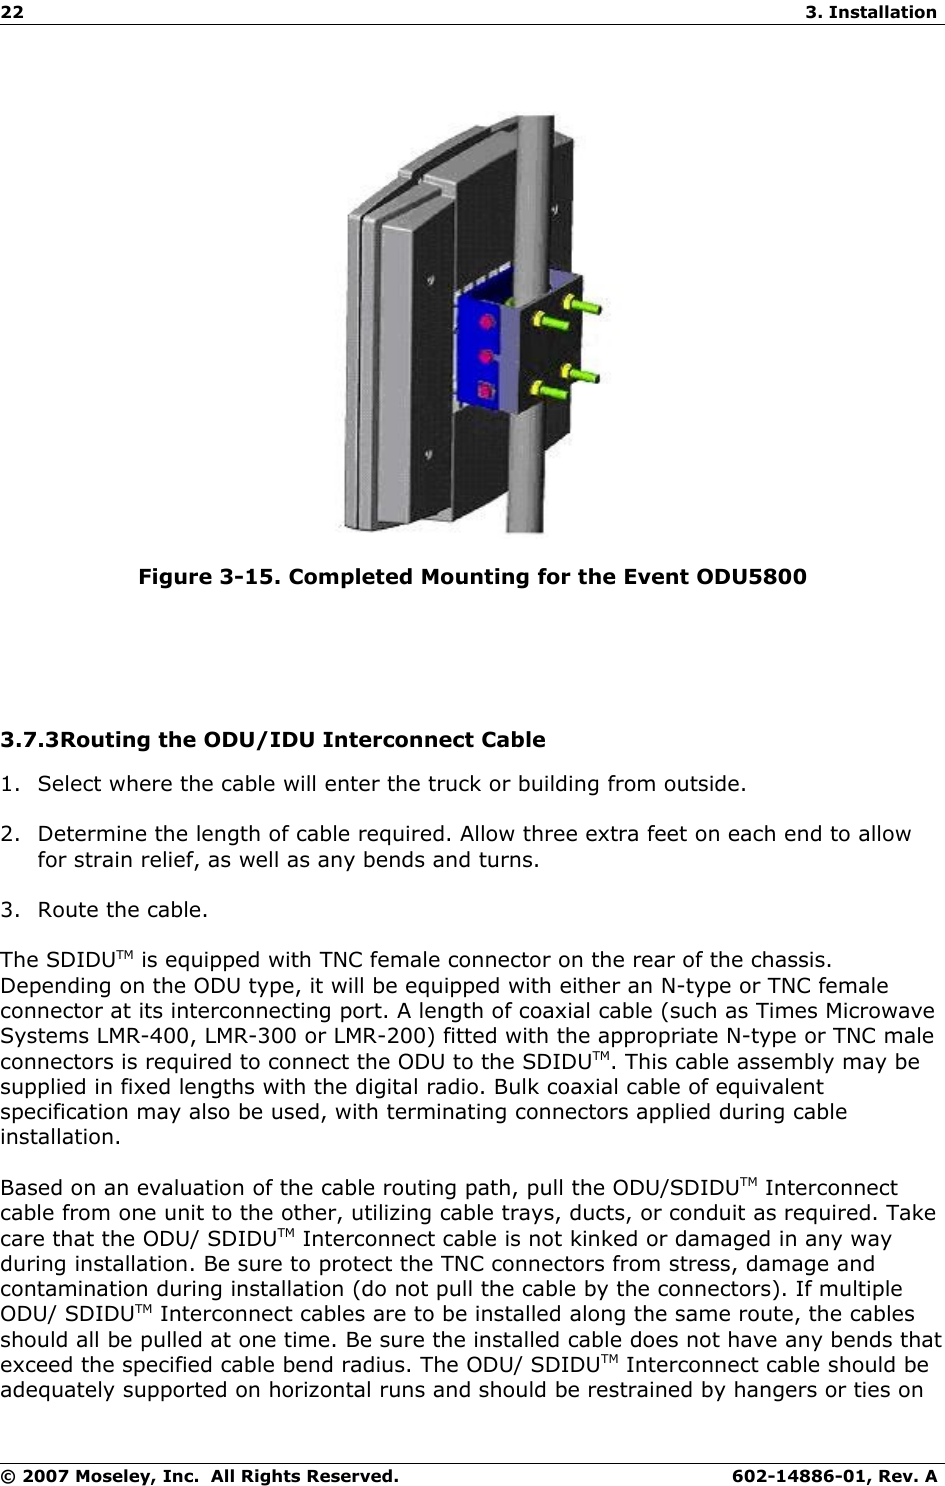 22 3. InstallationFigure 3-15. Completed Mounting for the Event ODU58003.7.3Routing the ODU/IDU Interconnect Cable1. Select where the cable will enter the truck or building from outside.2. Determine the length of cable required. Allow three extra feet on each end to allow for strain relief, as well as any bends and turns.3. Route the cable.The SDIDUTM is equipped with TNC female connector on the rear of the chassis. Depending on the ODU type, it will be equipped with either an N-type or TNC female connector at its interconnecting port. A length of coaxial cable (such as Times Microwave Systems LMR-400, LMR-300 or LMR-200) fitted with the appropriate N-type or TNC male connectors is required to connect the ODU to the SDIDUTM. This cable assembly may be supplied in fixed lengths with the digital radio. Bulk coaxial cable of equivalent specification may also be used, with terminating connectors applied during cable installation.Based on an evaluation of the cable routing path, pull the ODU/SDIDUTM Interconnect cable from one unit to the other, utilizing cable trays, ducts, or conduit as required. Take care that the ODU/ SDIDUTM Interconnect cable is not kinked or damaged in any way during installation. Be sure to protect the TNC connectors from stress, damage and contamination during installation (do not pull the cable by the connectors). If multiple ODU/ SDIDUTM Interconnect cables are to be installed along the same route, the cables should all be pulled at one time. Be sure the installed cable does not have any bends that exceed the specified cable bend radius. The ODU/ SDIDUTM Interconnect cable should be adequately supported on horizontal runs and should be restrained by hangers or ties on © 2007 Moseley, Inc.  All Rights Reserved. 602-14886-01, Rev. A